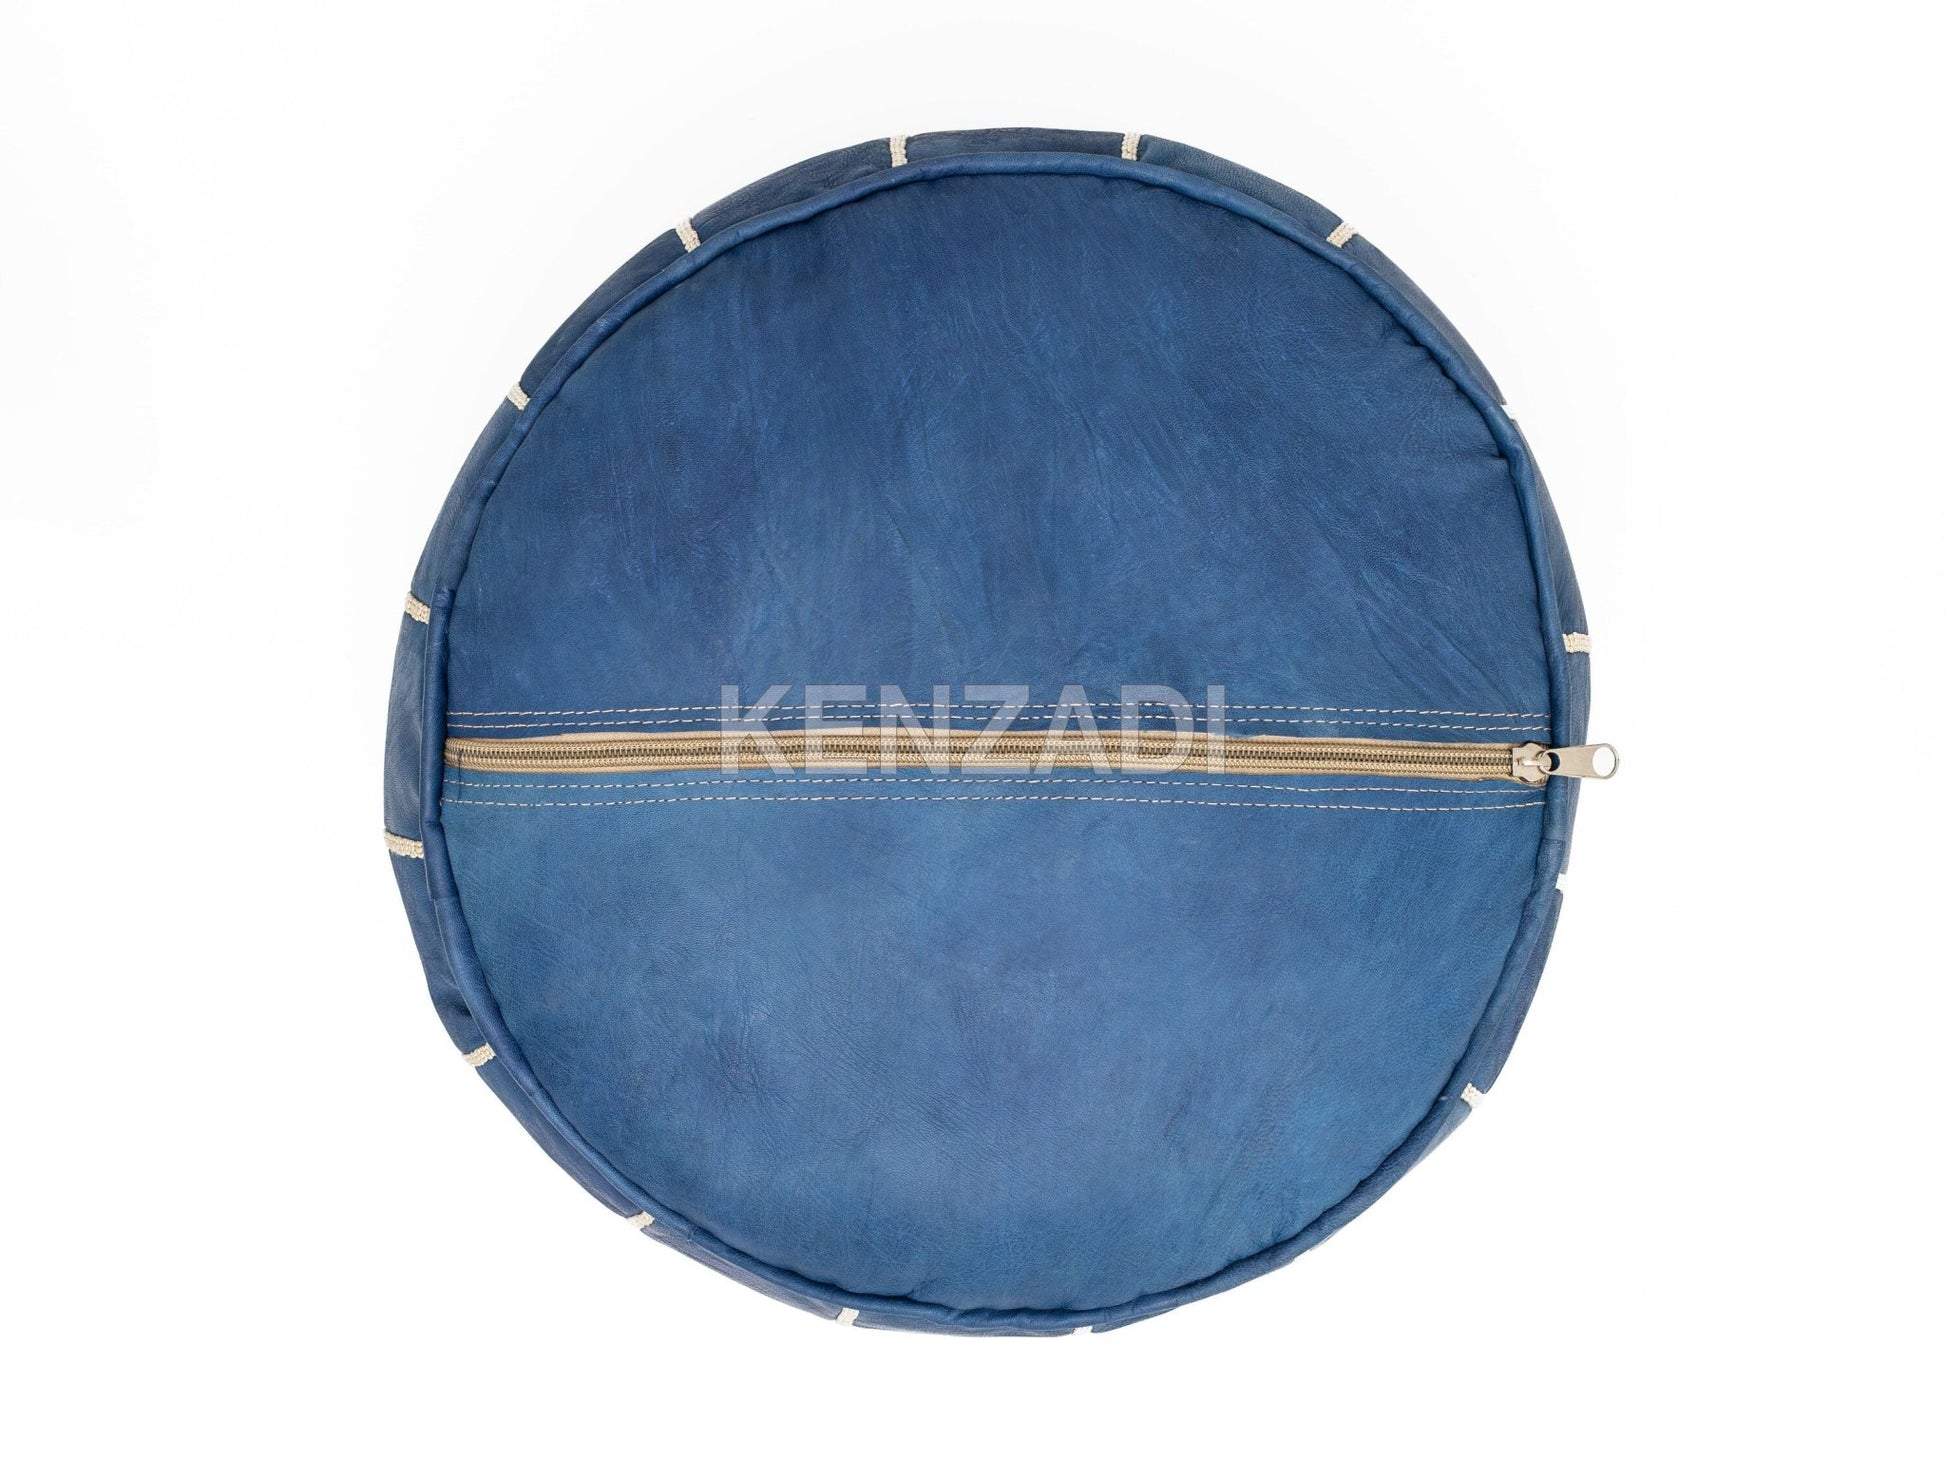 Authentic Moroccan pouf in sewn TAN leather with blue and beige embroidery by Kenzadi